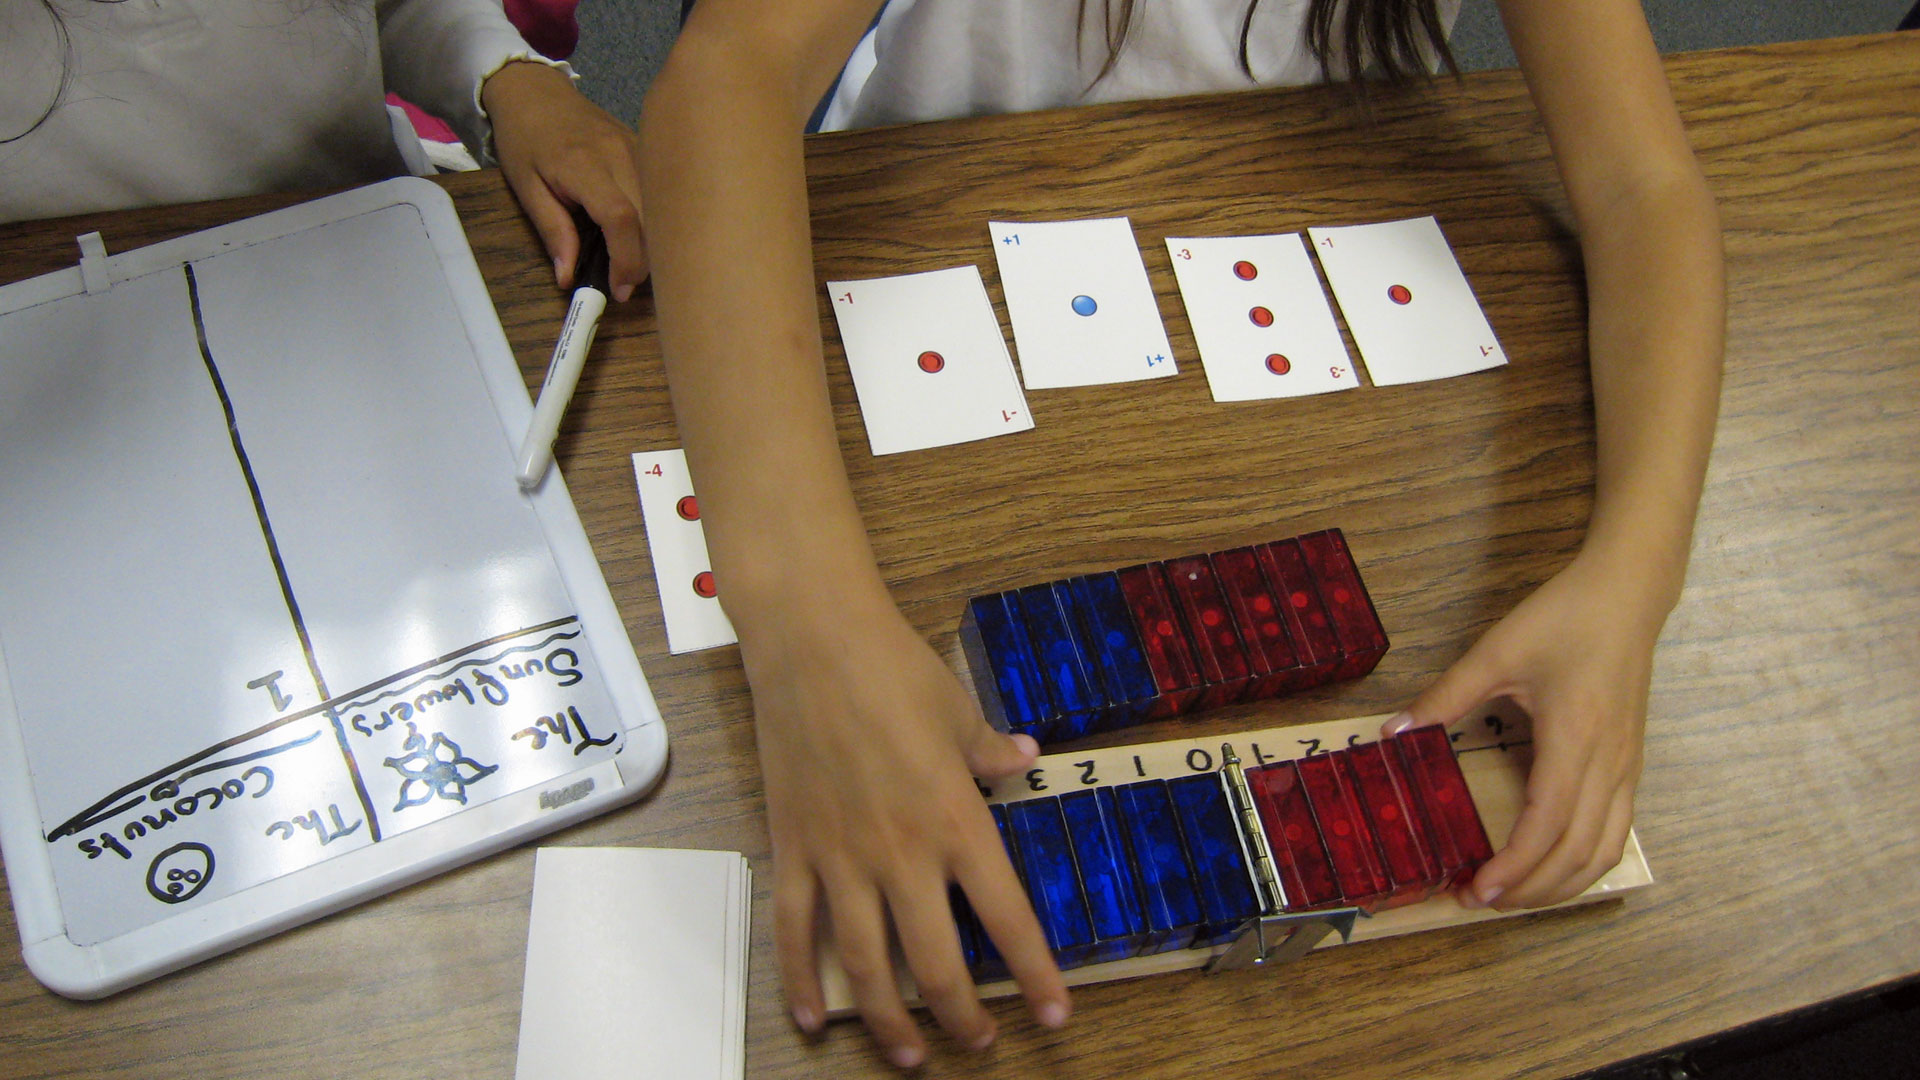 Researchers from Stanford's AAALab built a manipulative to emphasize symmetry and tested it on 4th graders.